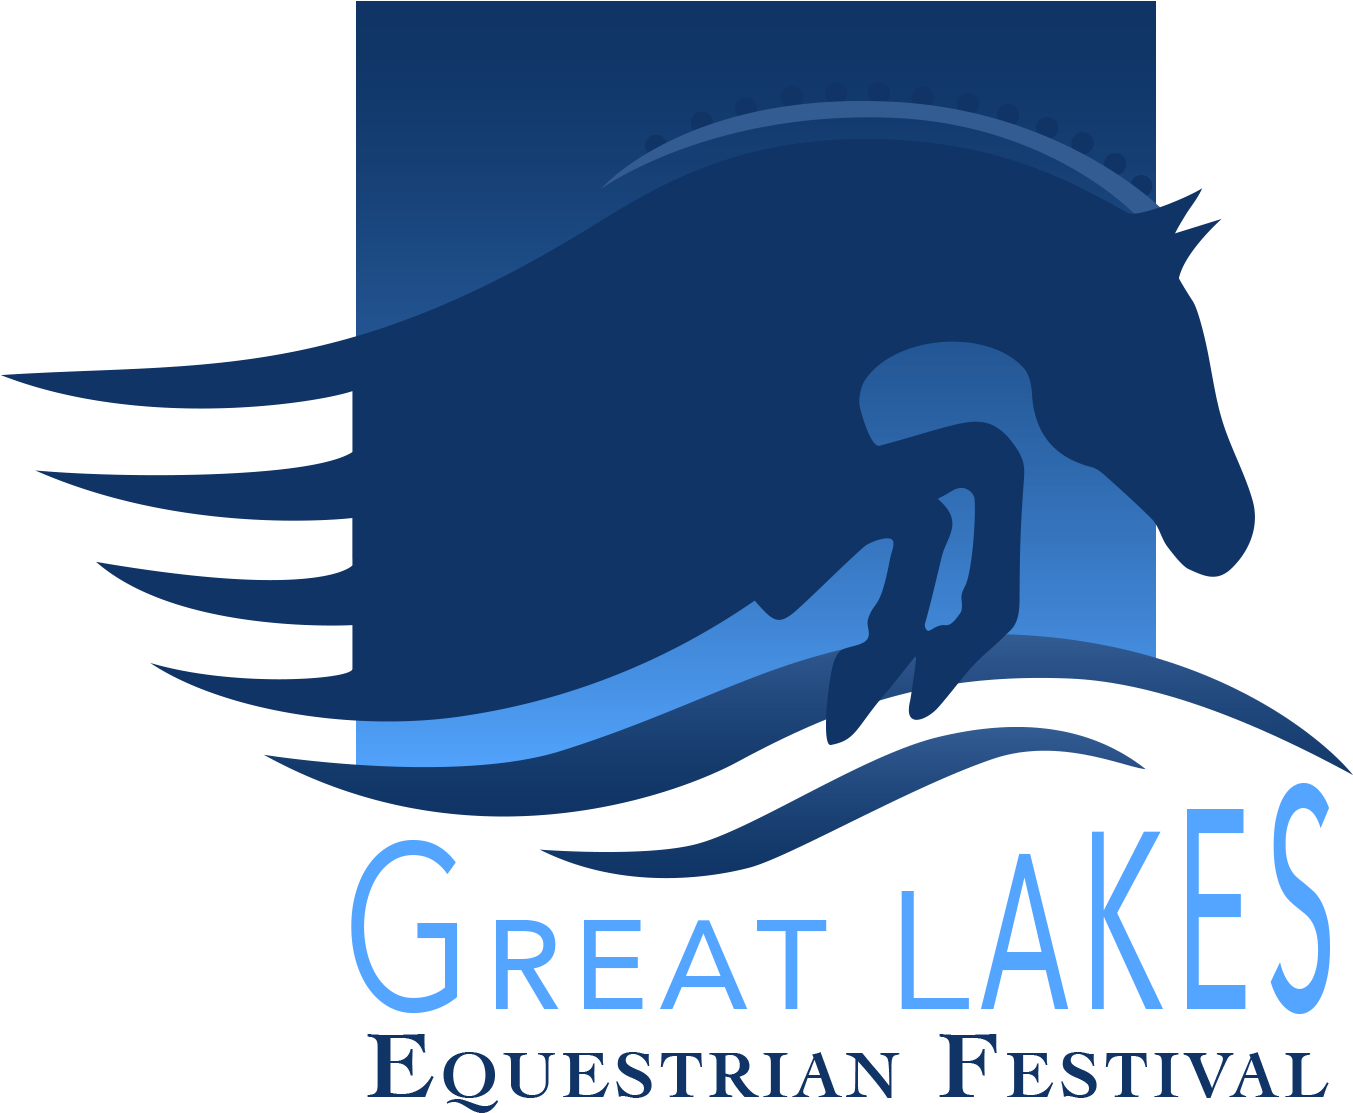 Great Lakes Equestrian Festival Logo PNG image